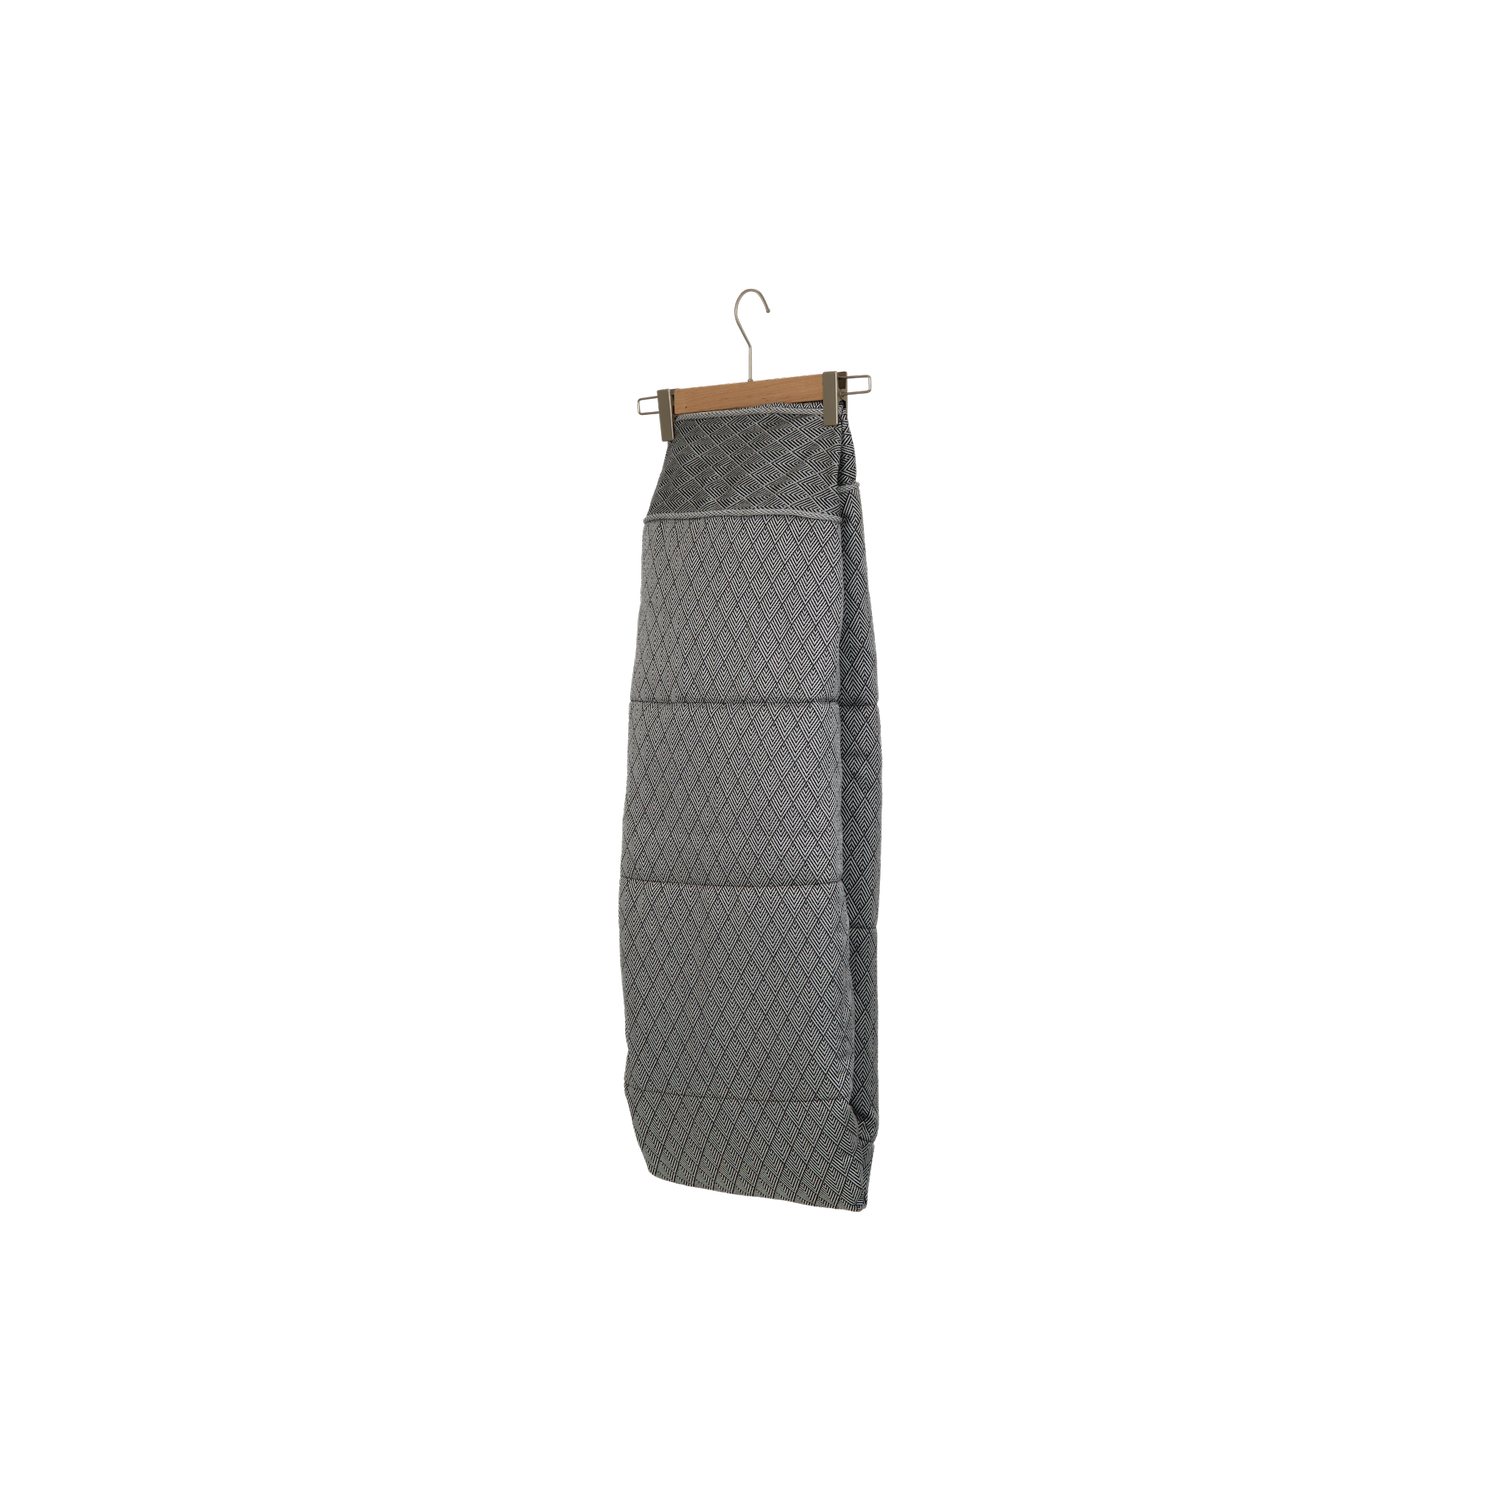 A front view of a luxury pool float hanging in a black and silver colored fabric.